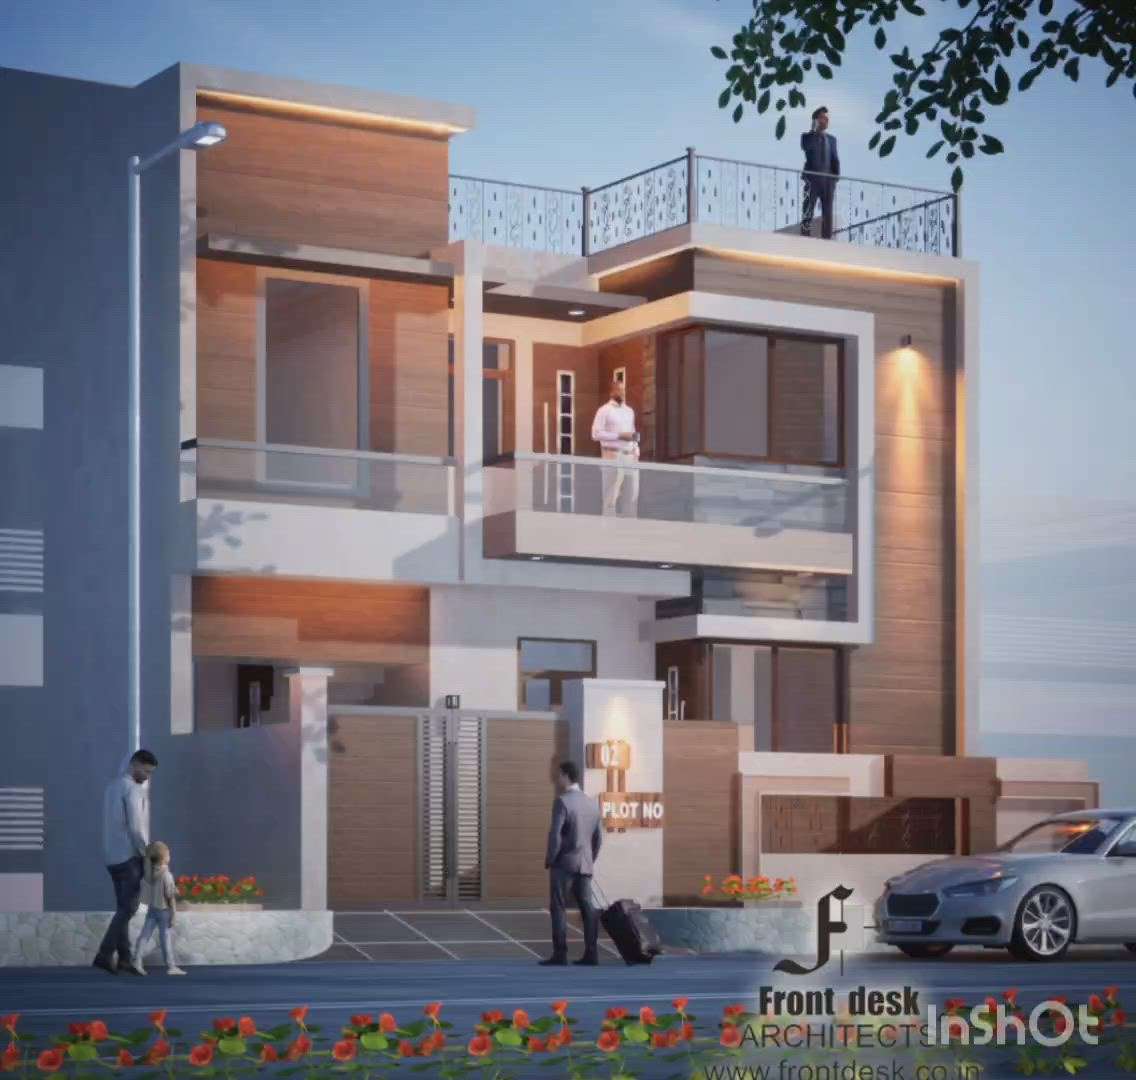 # Call Now 9649489706.👇👇
#30x60 Feet Plot.
#3D Front Elevation.
#House Design.